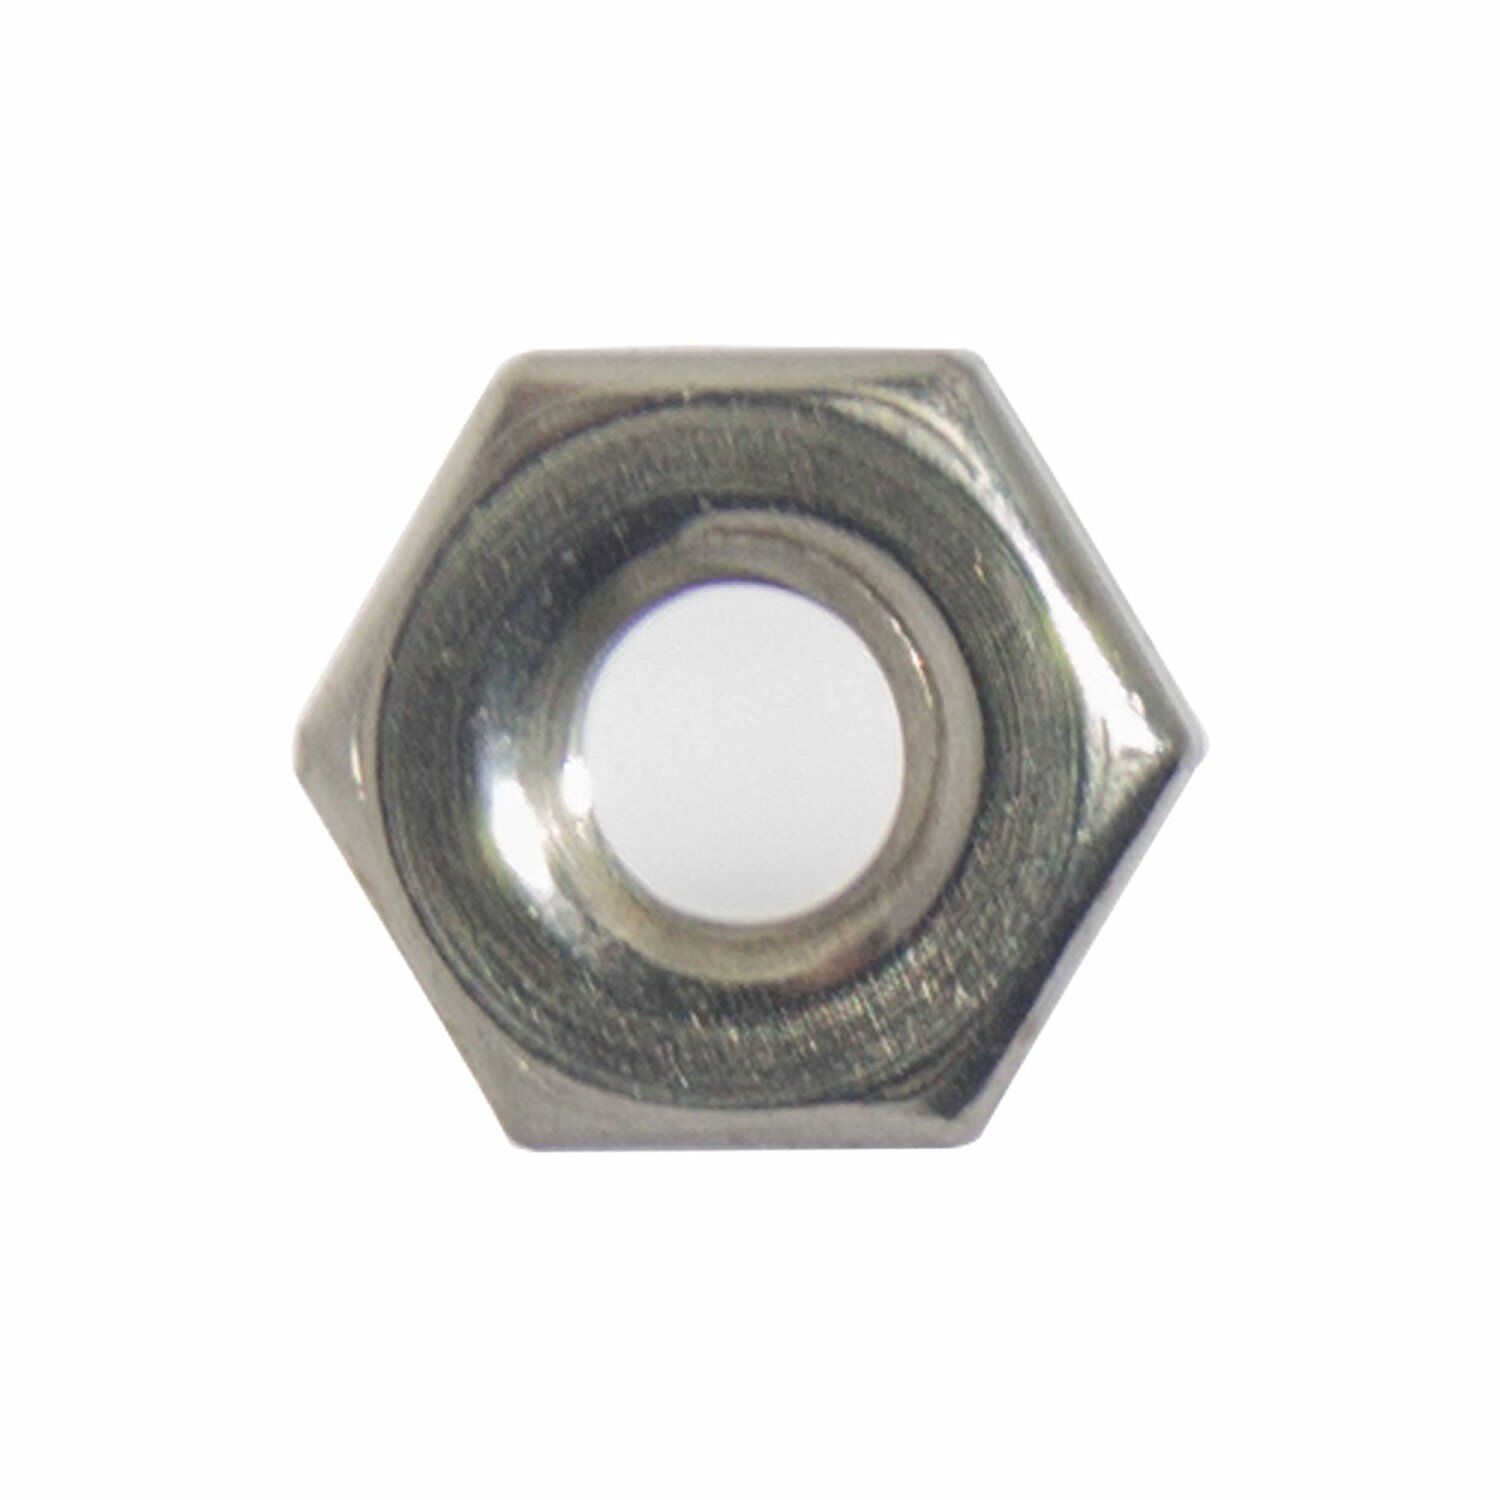 6-32 Machine Screw Hex Nuts Stainless Steel 18-8 Qty 100